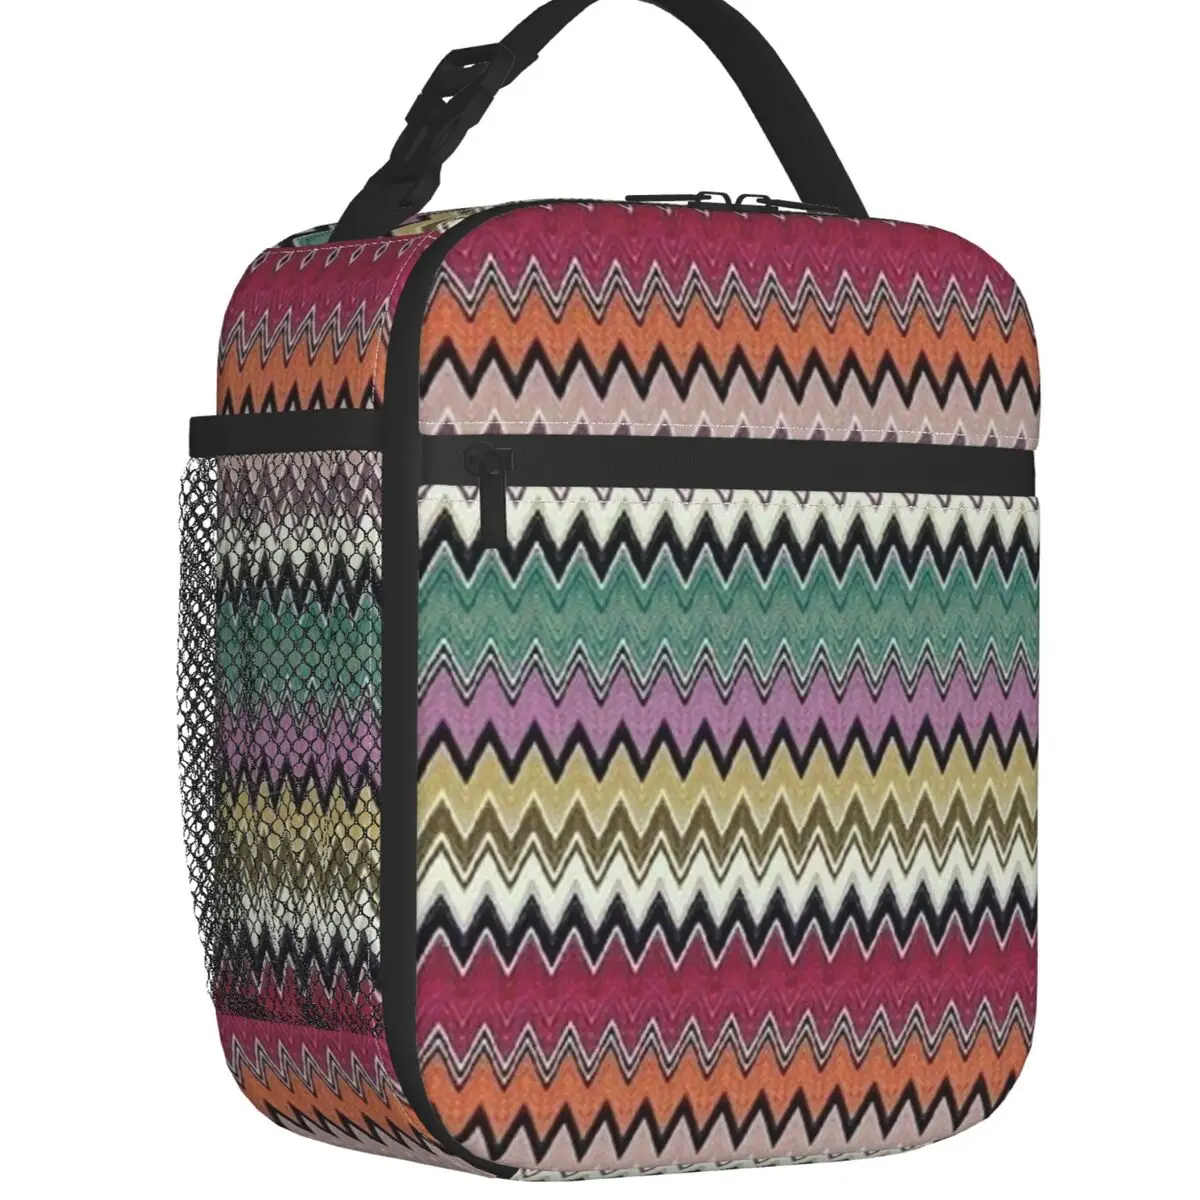 

Colorful Zig Zag Chevron Resuable Lunch Box Leakproof Bohemian Geometric Cooler Thermal Food Insulated Lunch Bag Kids School